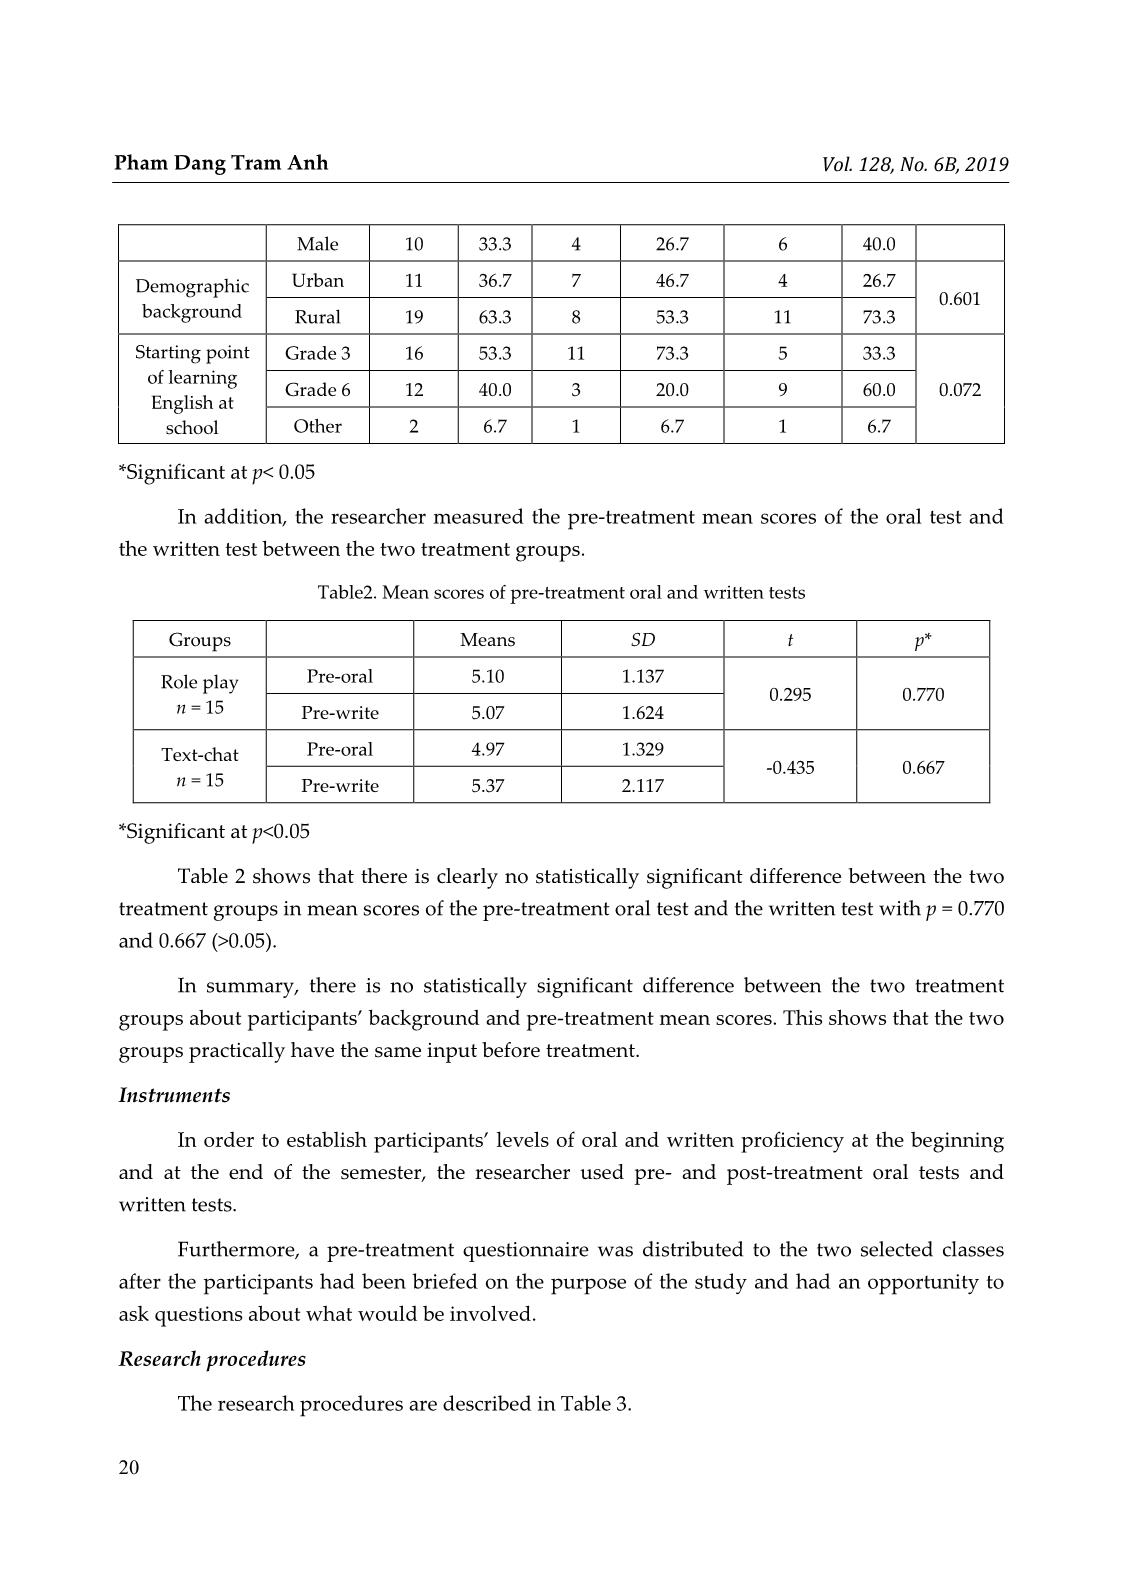 Quantitative analysis of the effect of synchronous online discussions on oral and written language development for efl university students in Vietnam trang 5